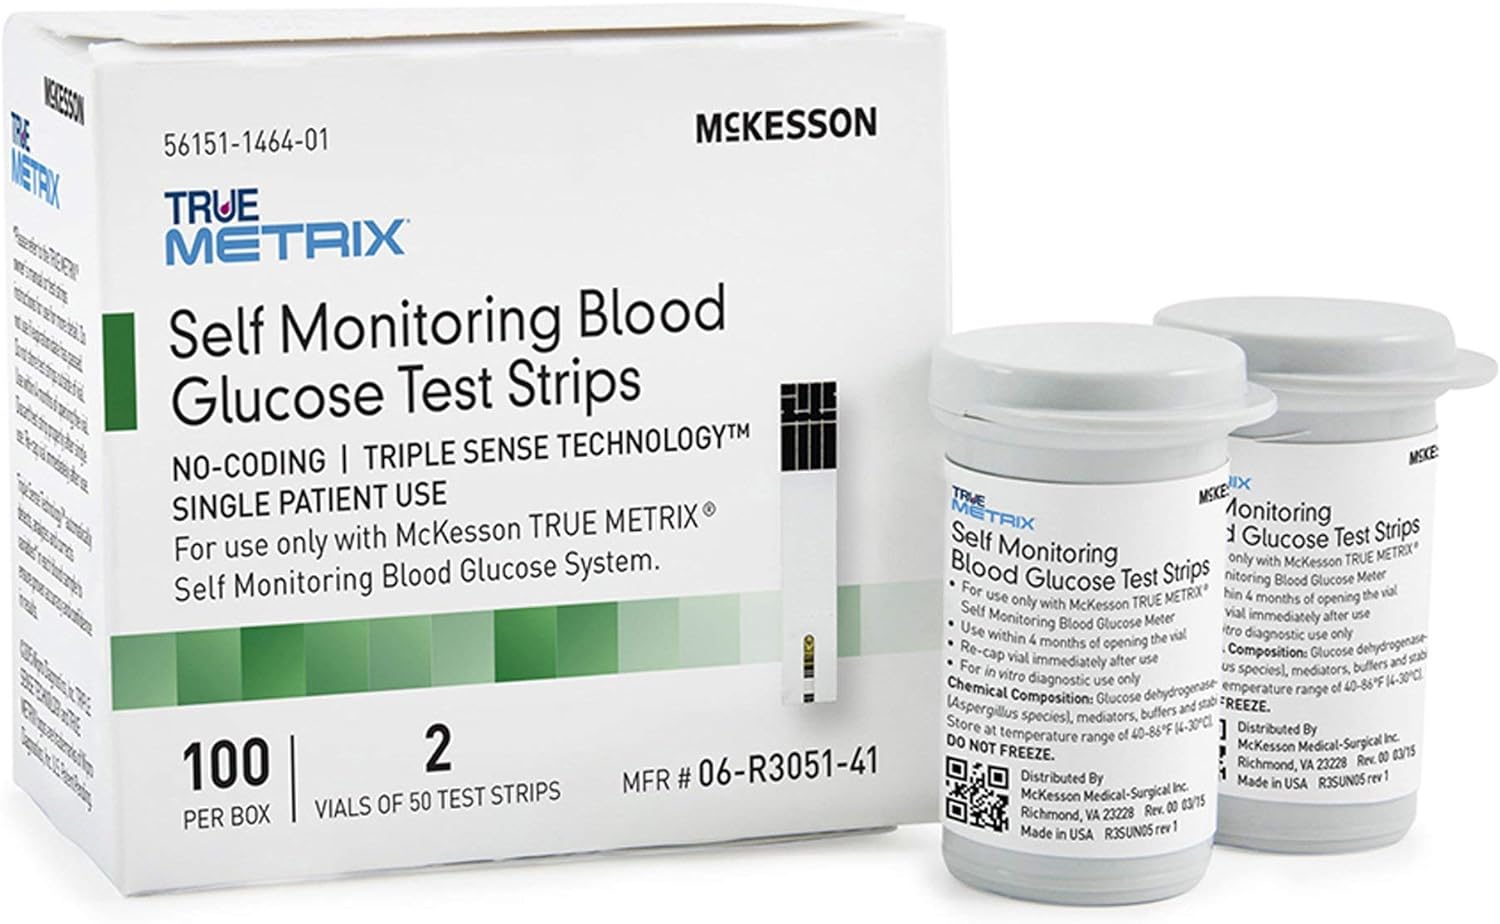 McKesson True METRIX Self-Monitoring Blood Glucose Test Strips - Supplies for Diabetes Self Monitor Systems, 100 Strips, 12 Packs, 1200 Total